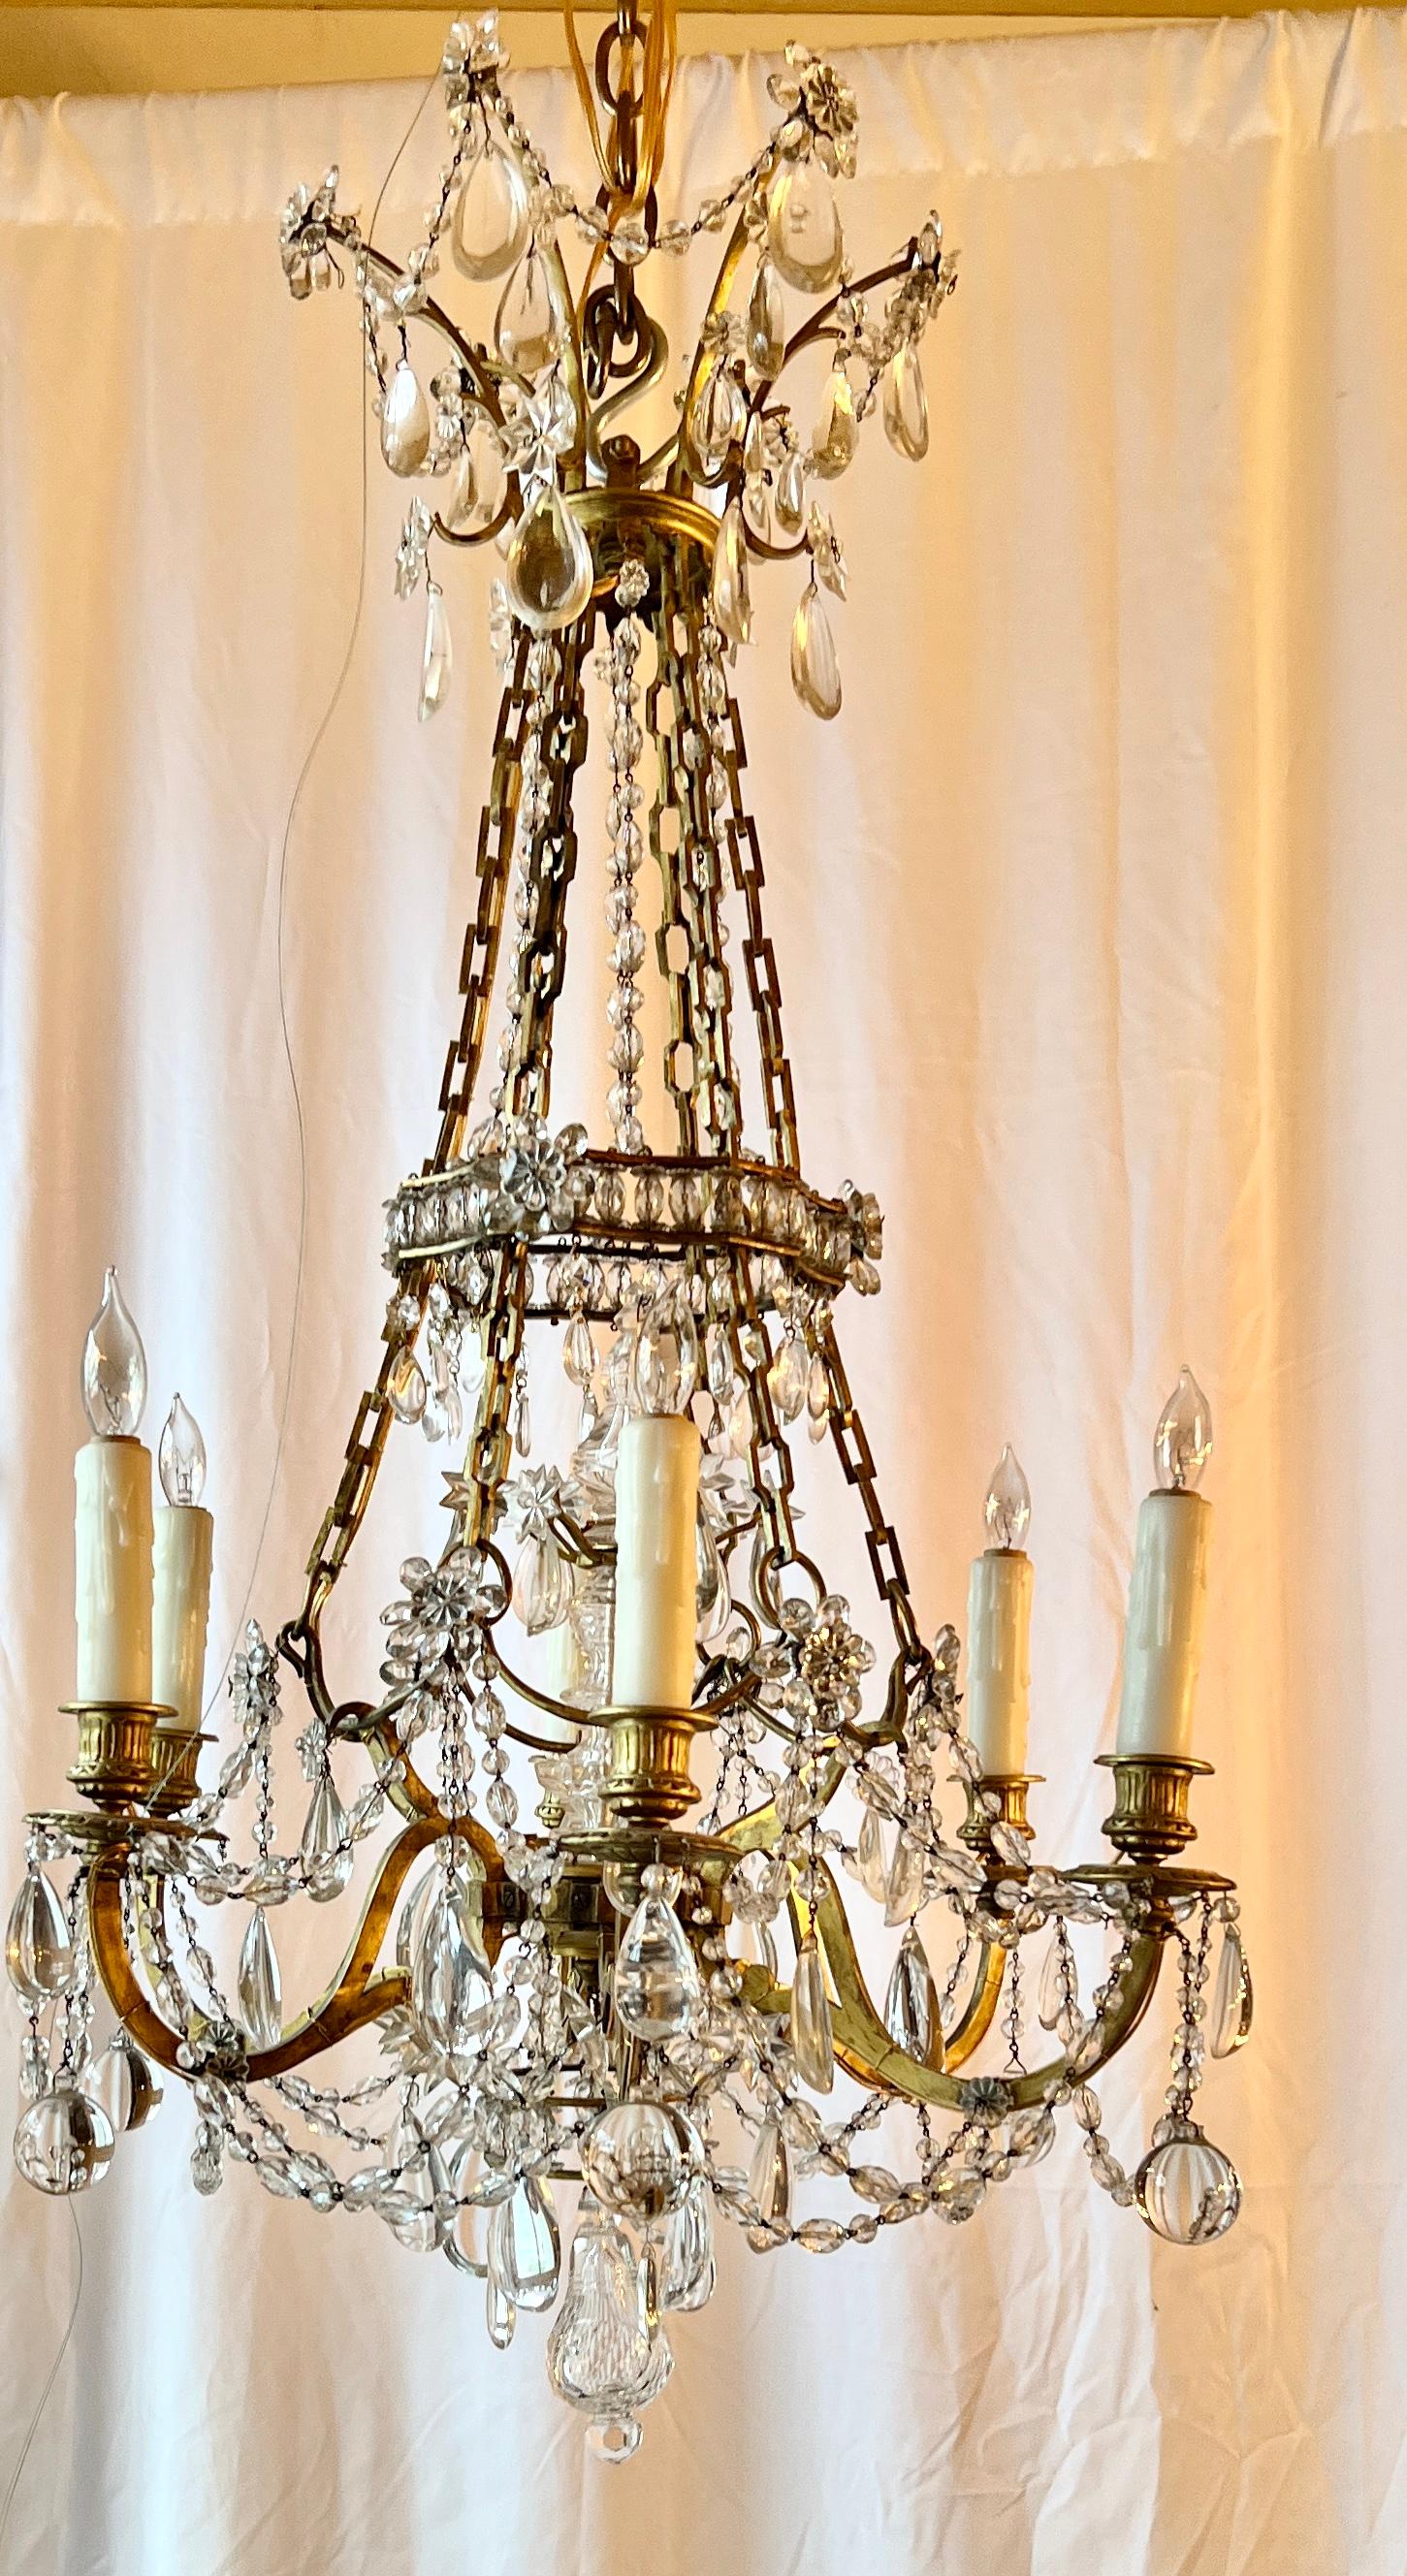 Antique French Gold Bronze and Baccarat Crystal Heavily Draped 6 Light Chandelier, Circa 1900.